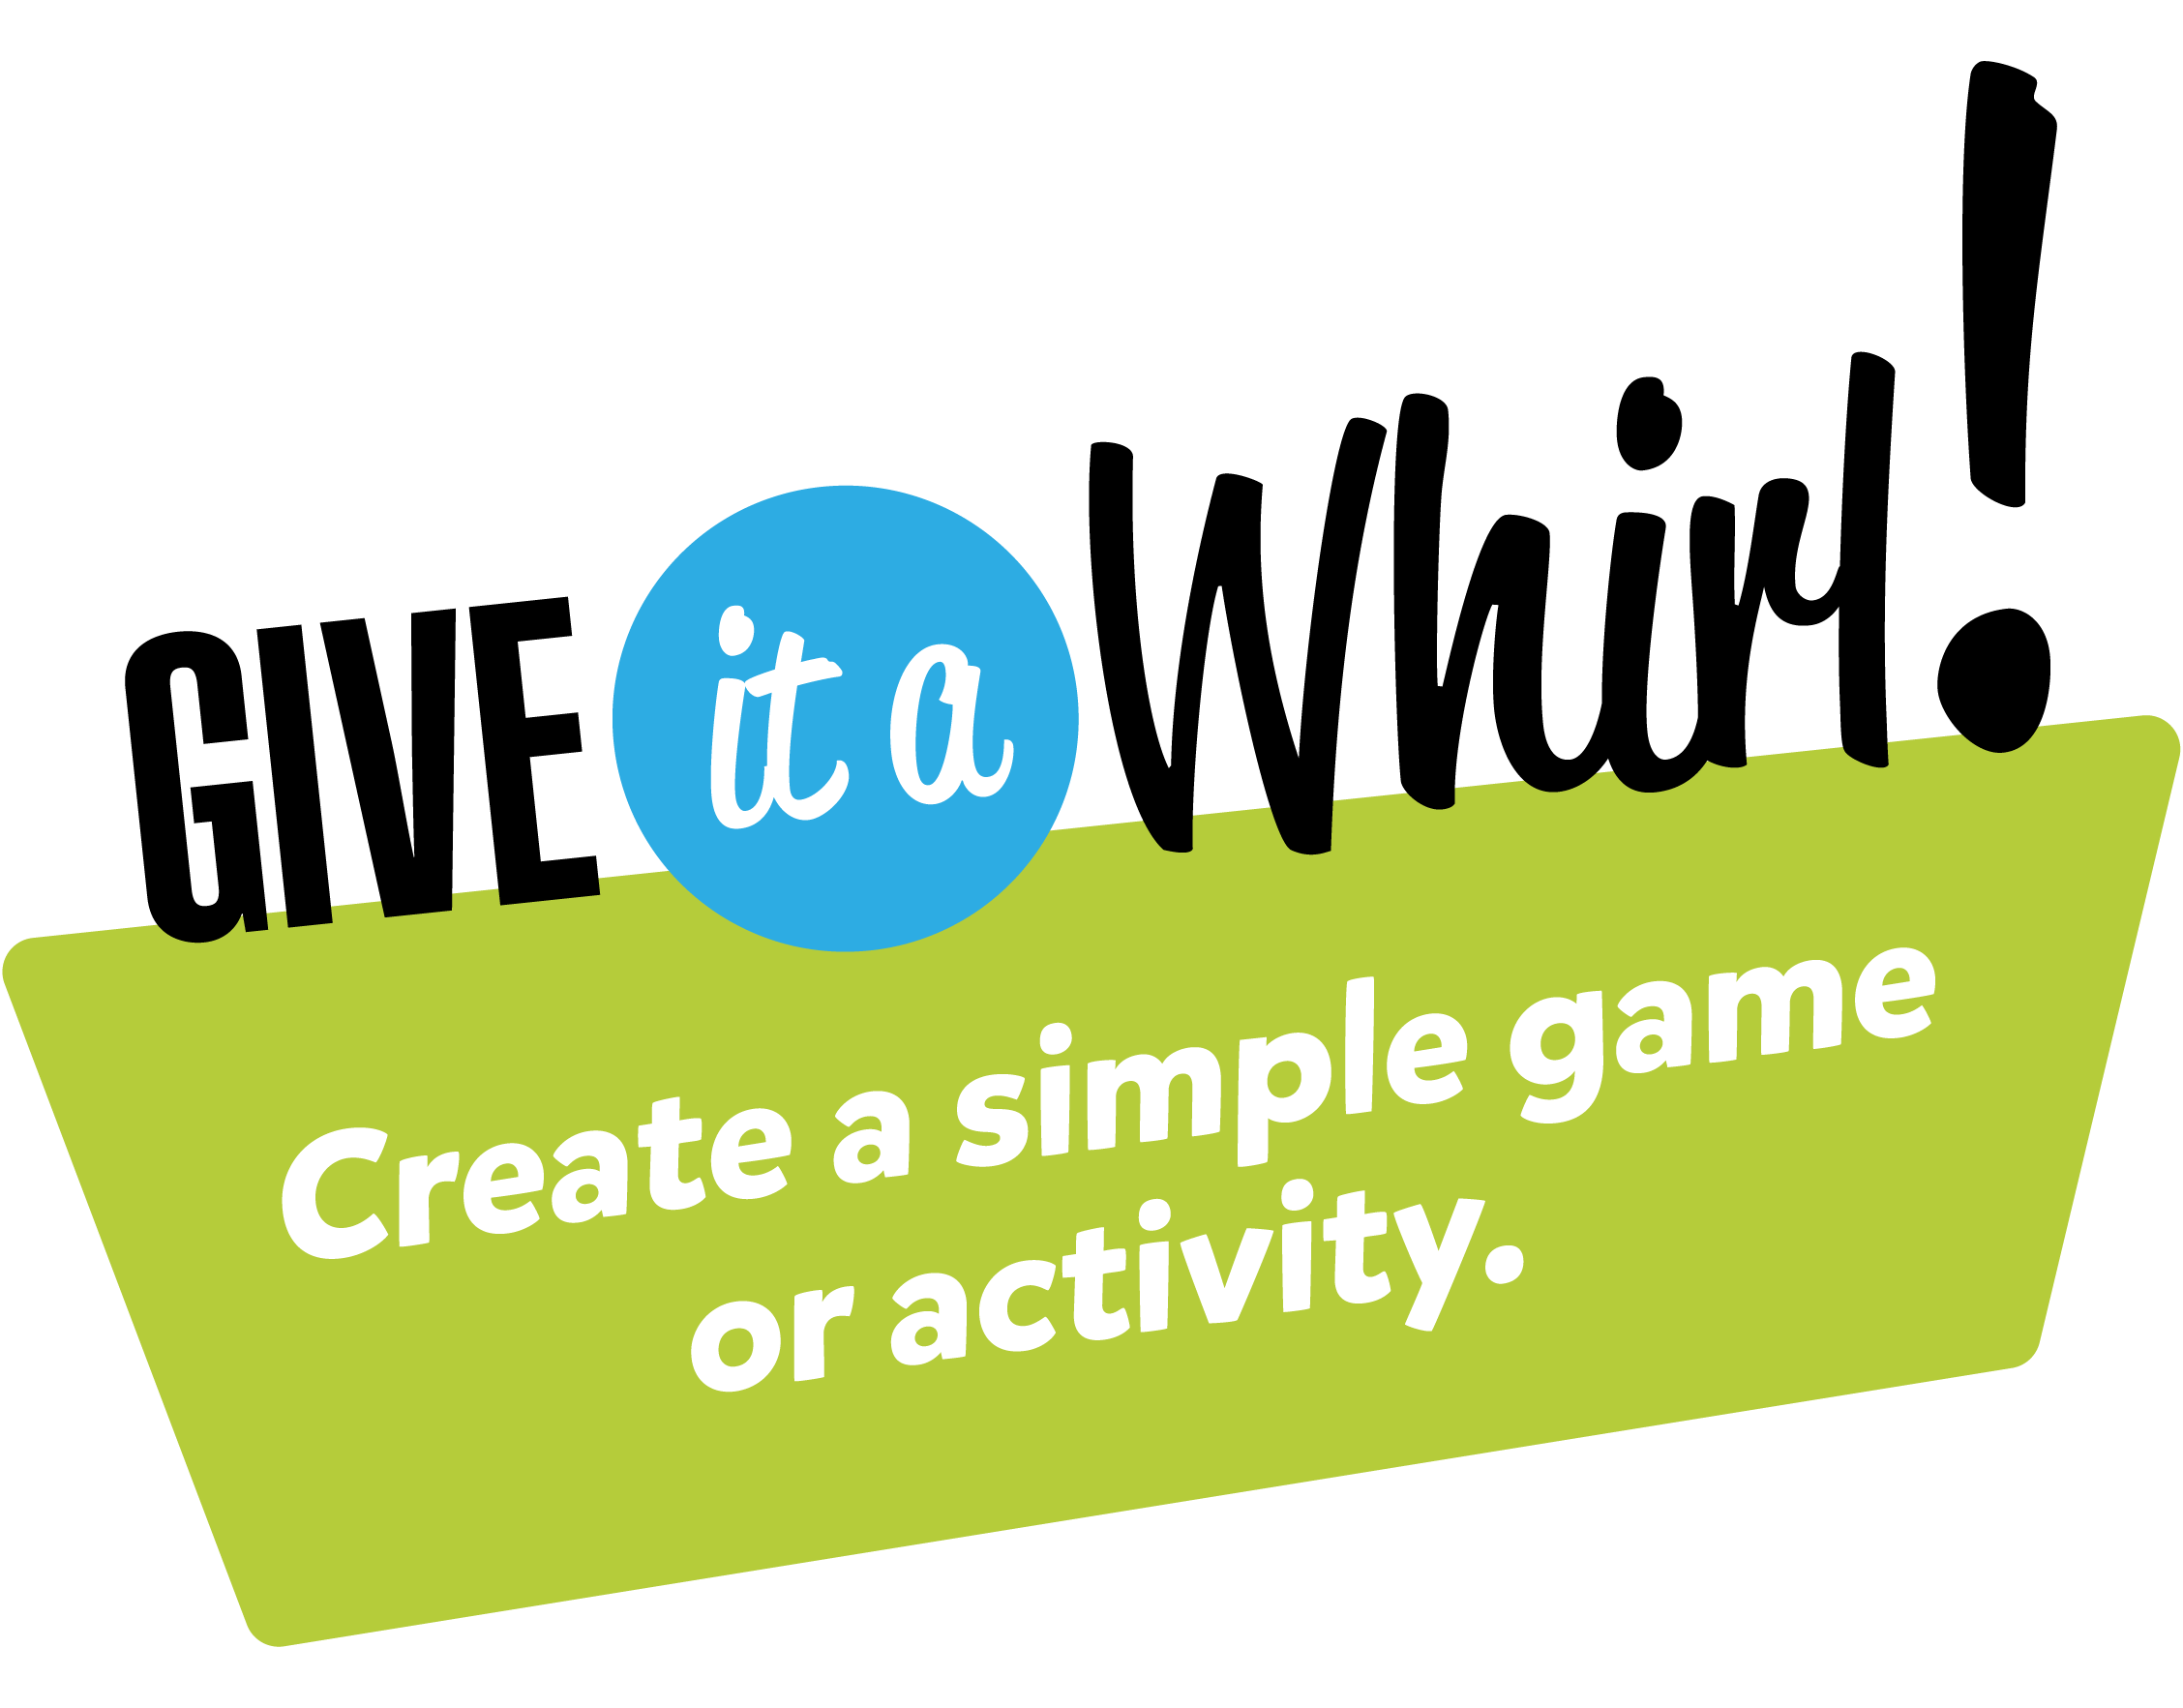 Give it a Whirl! Create a simple game or activity and share your video for a Chance to Win!